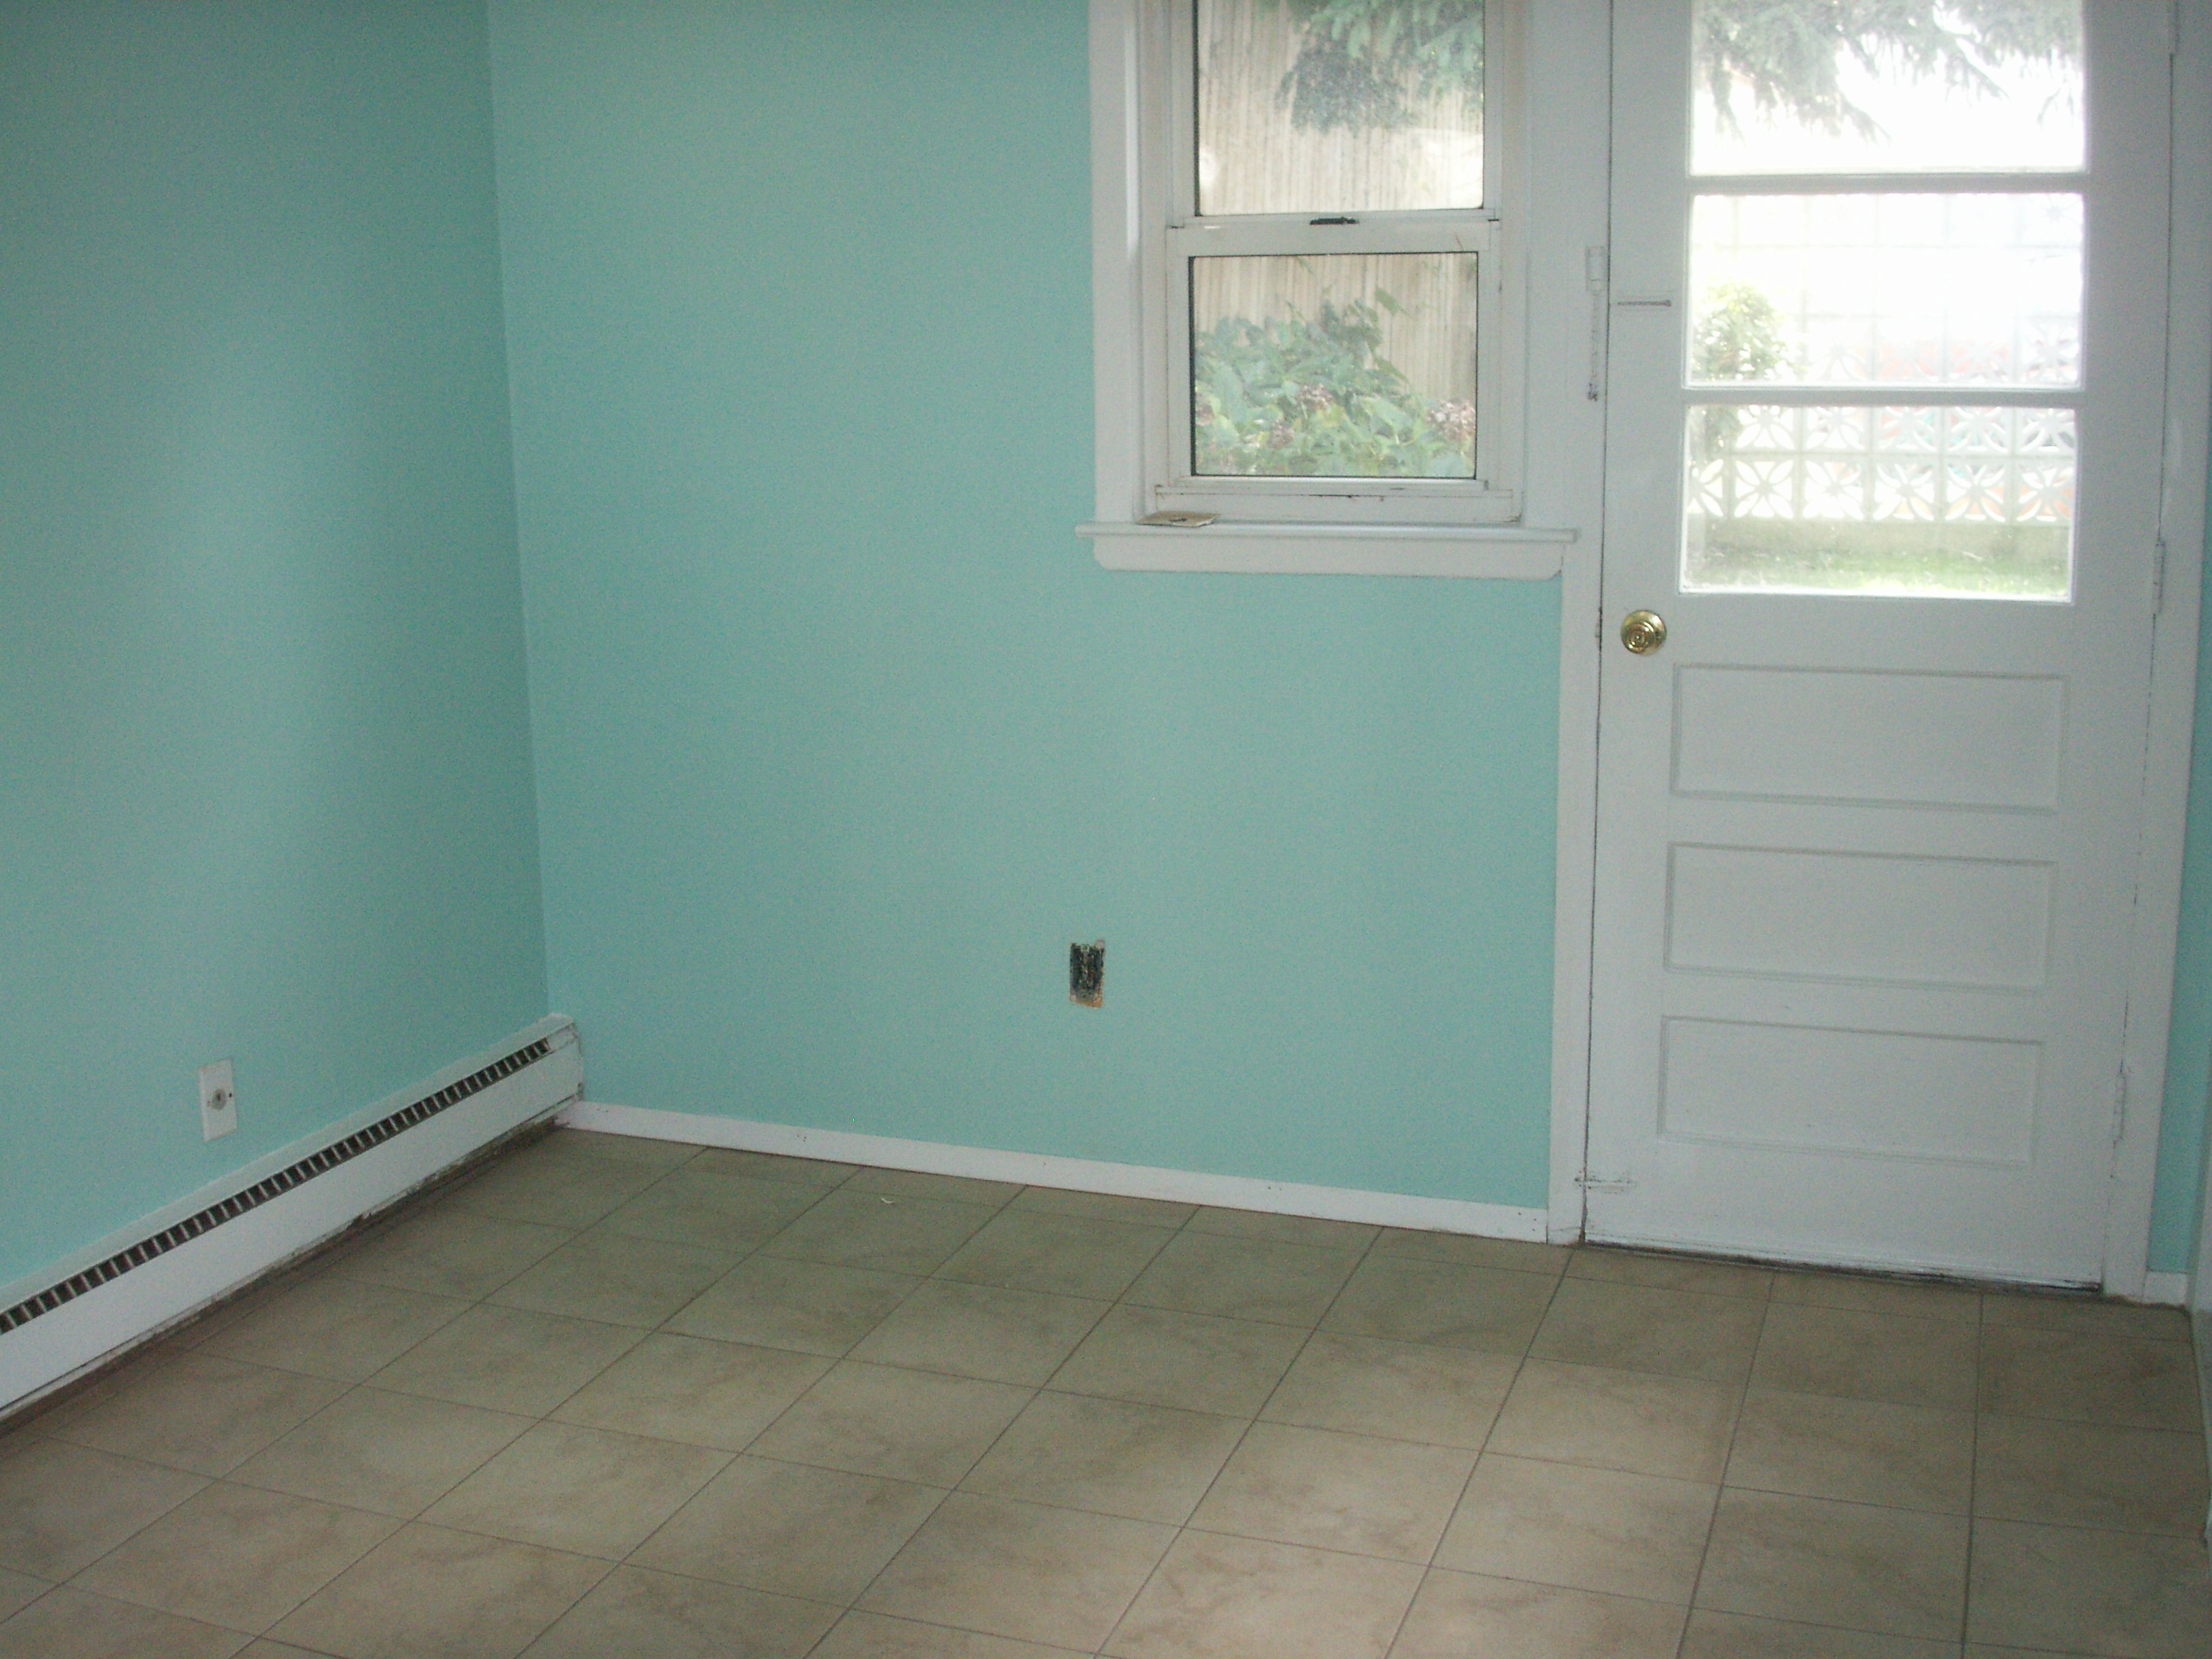 Renovated Studio in College Point Features Kitchen and 1 Full Bathroom. Rent includes Use of Yard as well as Heat and Hot Water. Located near local bus stops as well as the Express bus to Manhattan. Call for more information today!